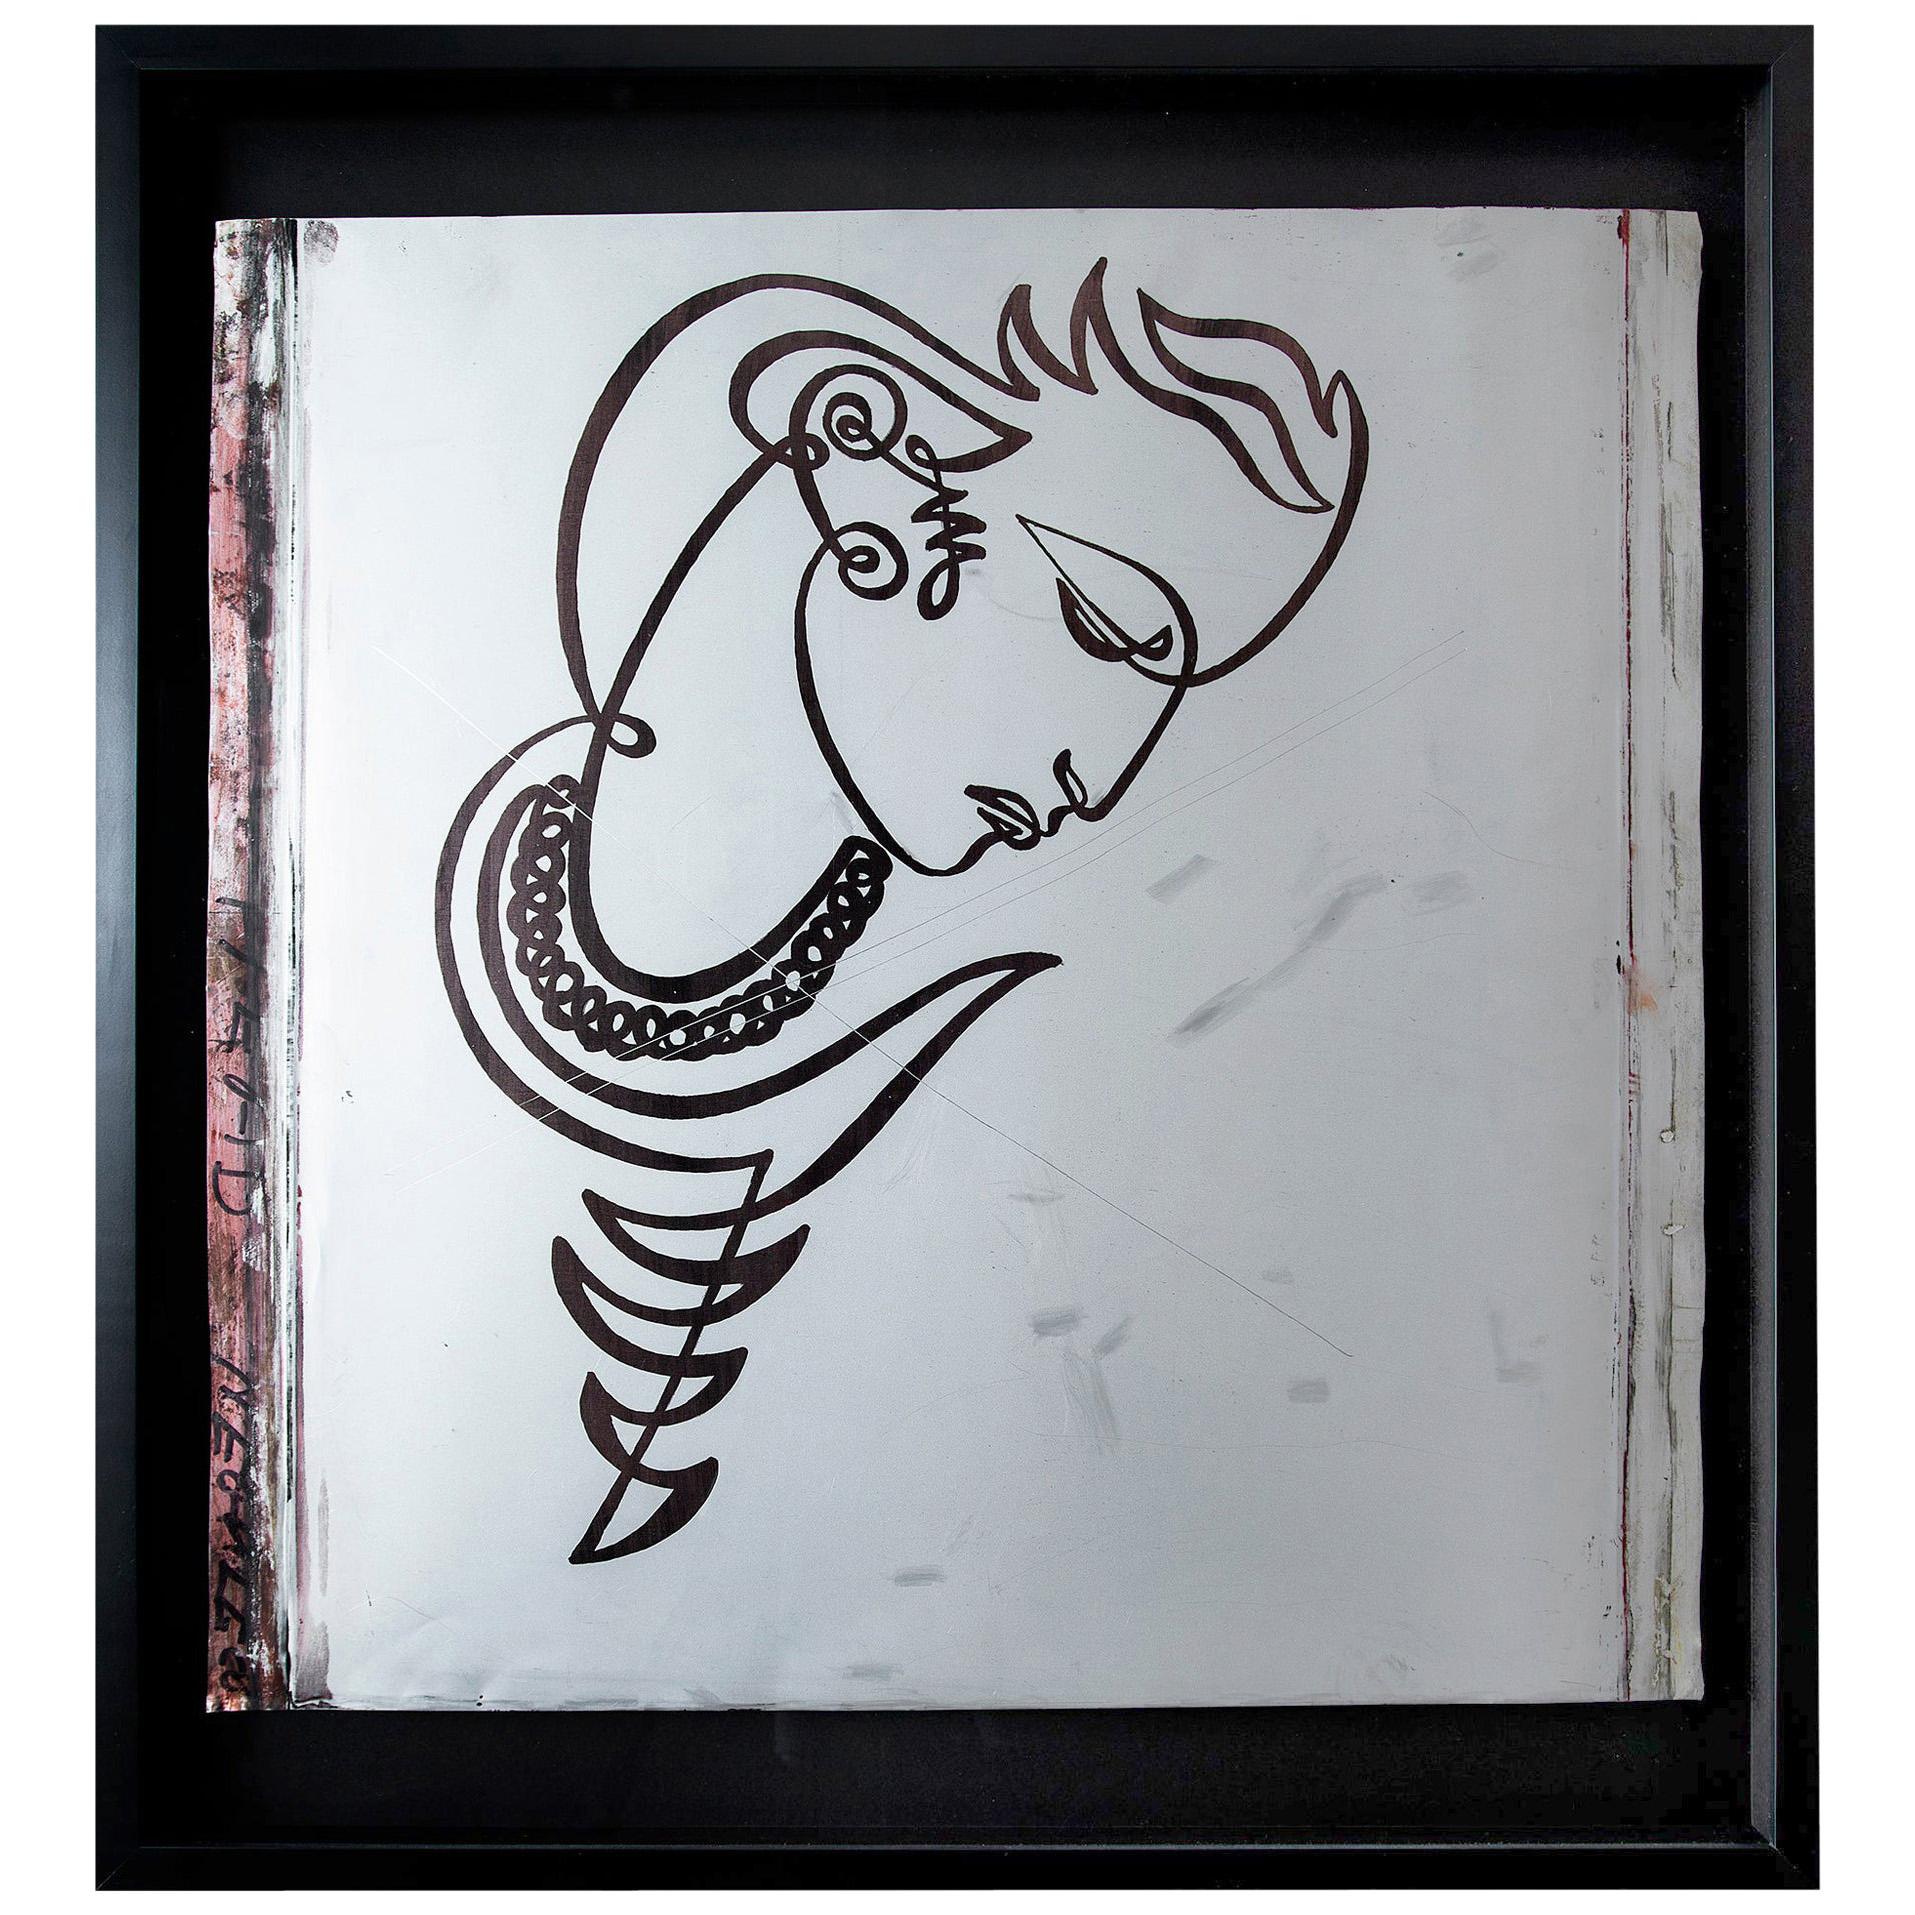 Jean Negulesco Continuous Line Drawing on Metal Plate